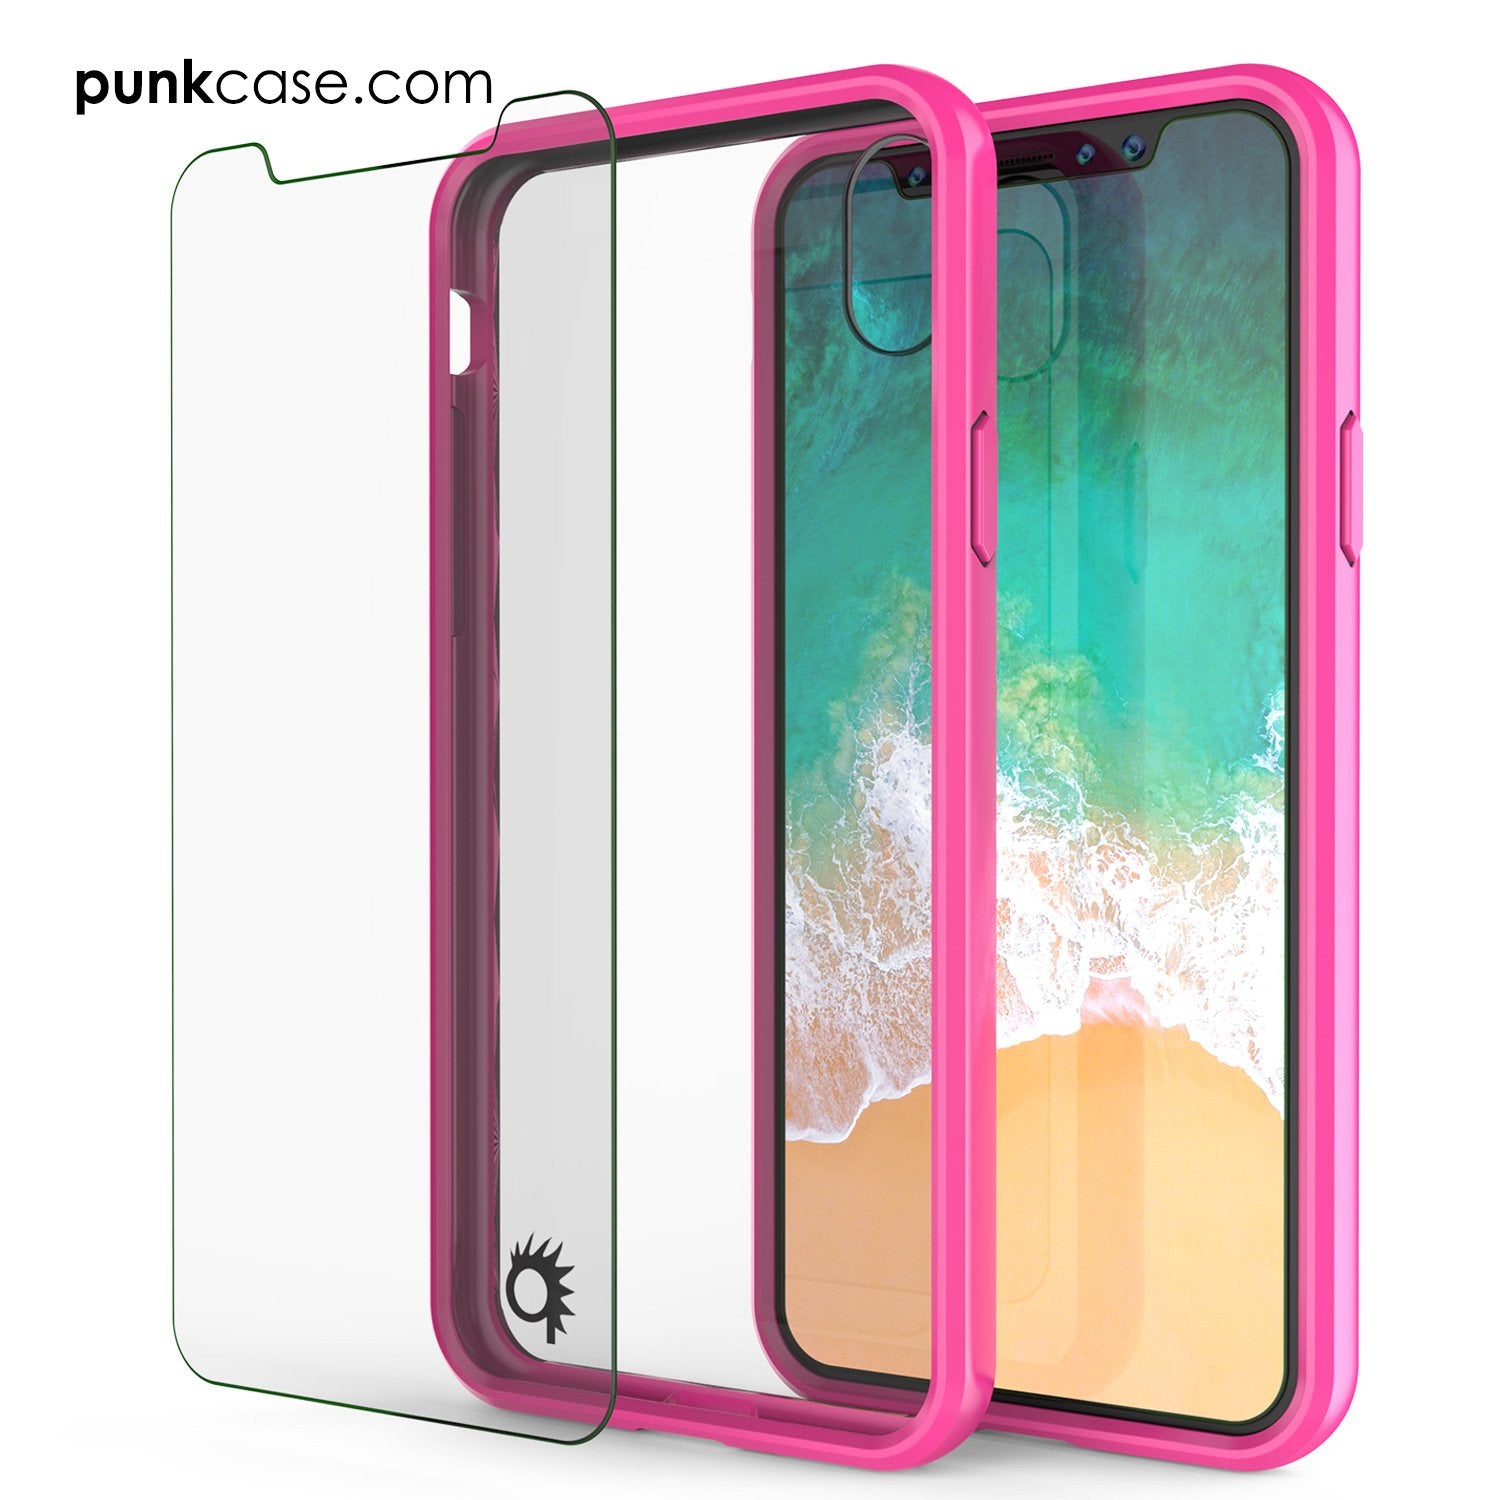 iPhone X Case, PUNKcase [LUCID 2.0 Series] [Slim Fit] Armor Cover W/Integrated Anti-Shock System [Pink] - PunkCase NZ